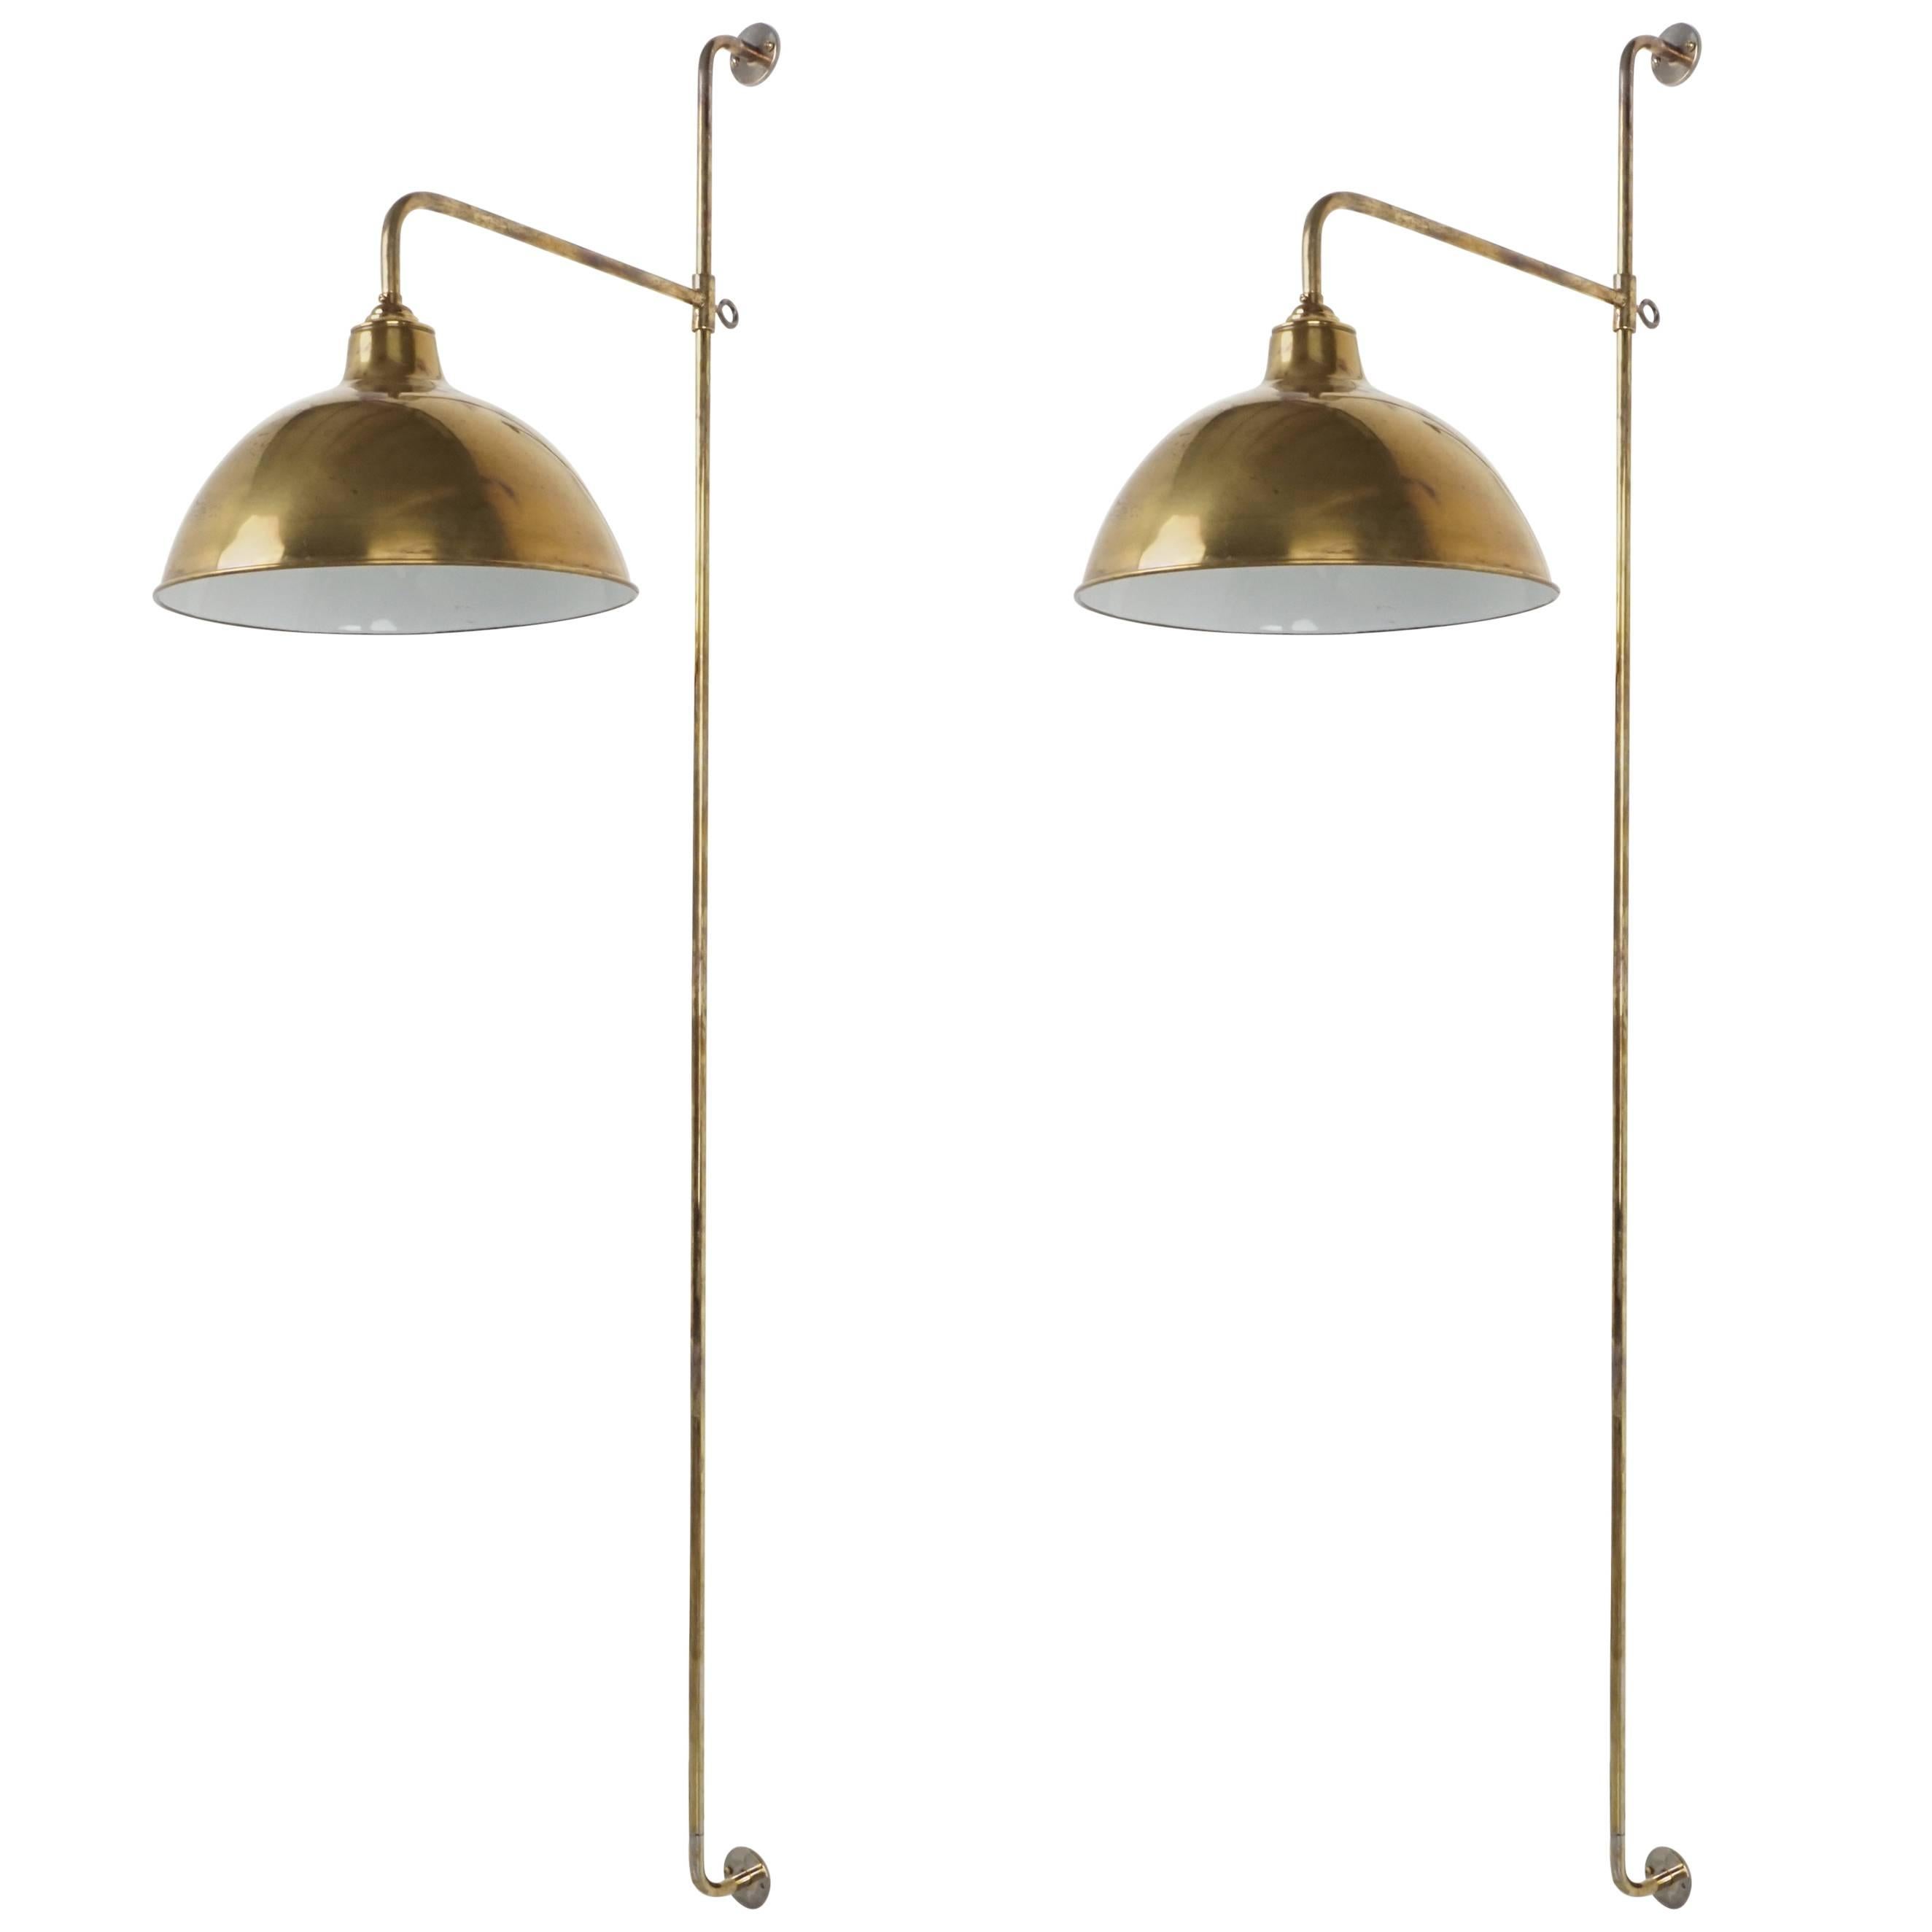 Pair of French Sconces with Vintage Brass Shade